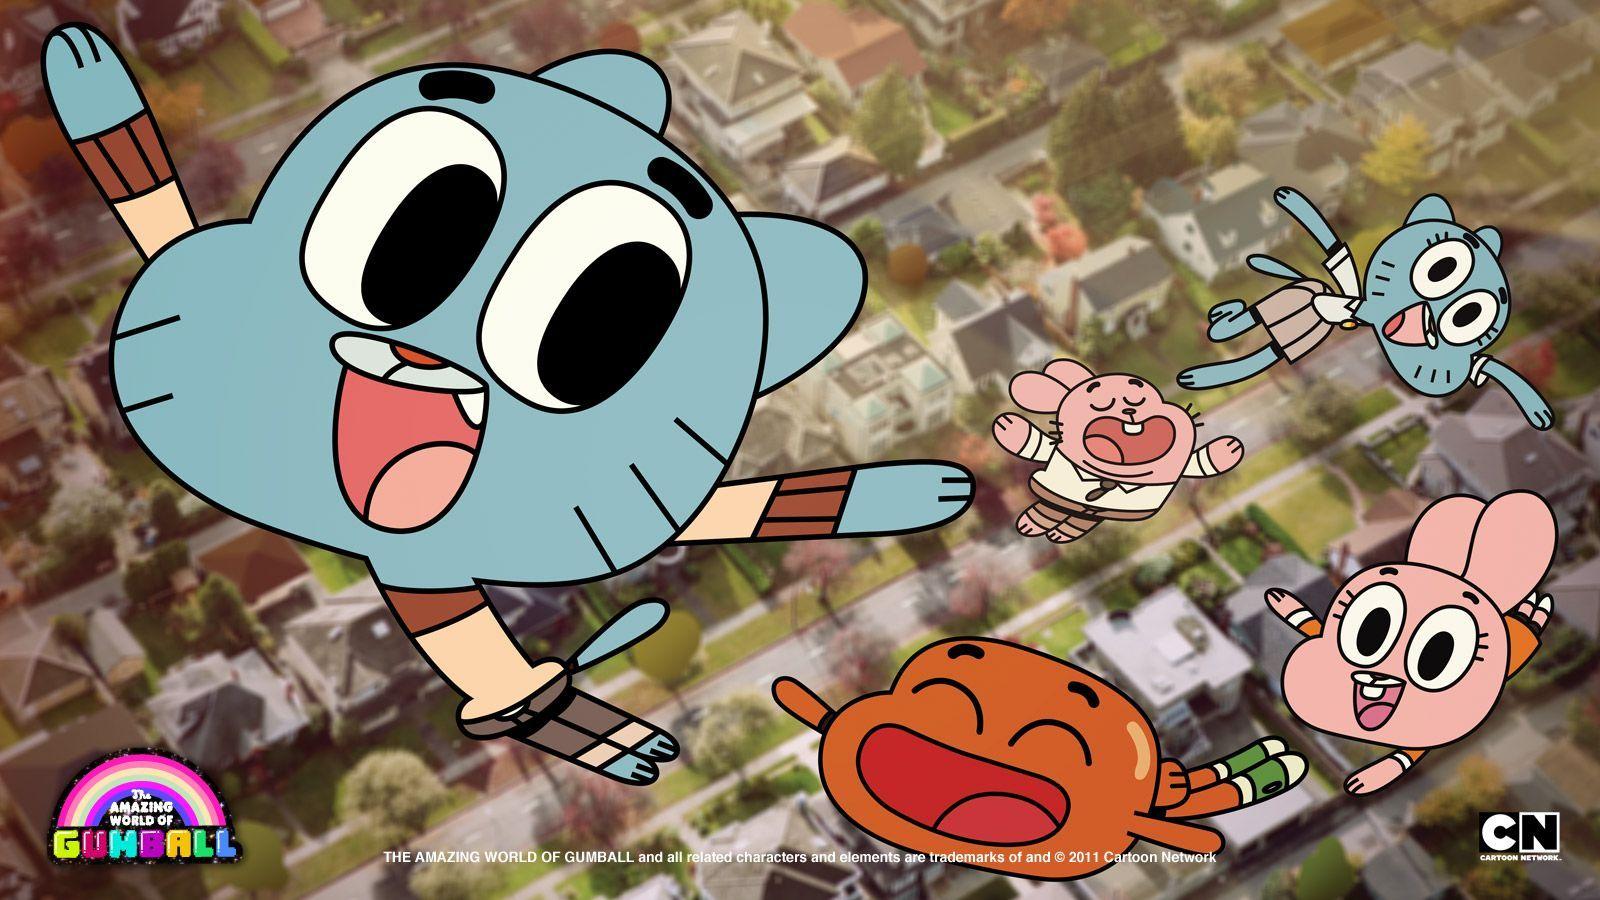 The Amazing World Of Gumball Wallpaper for PC